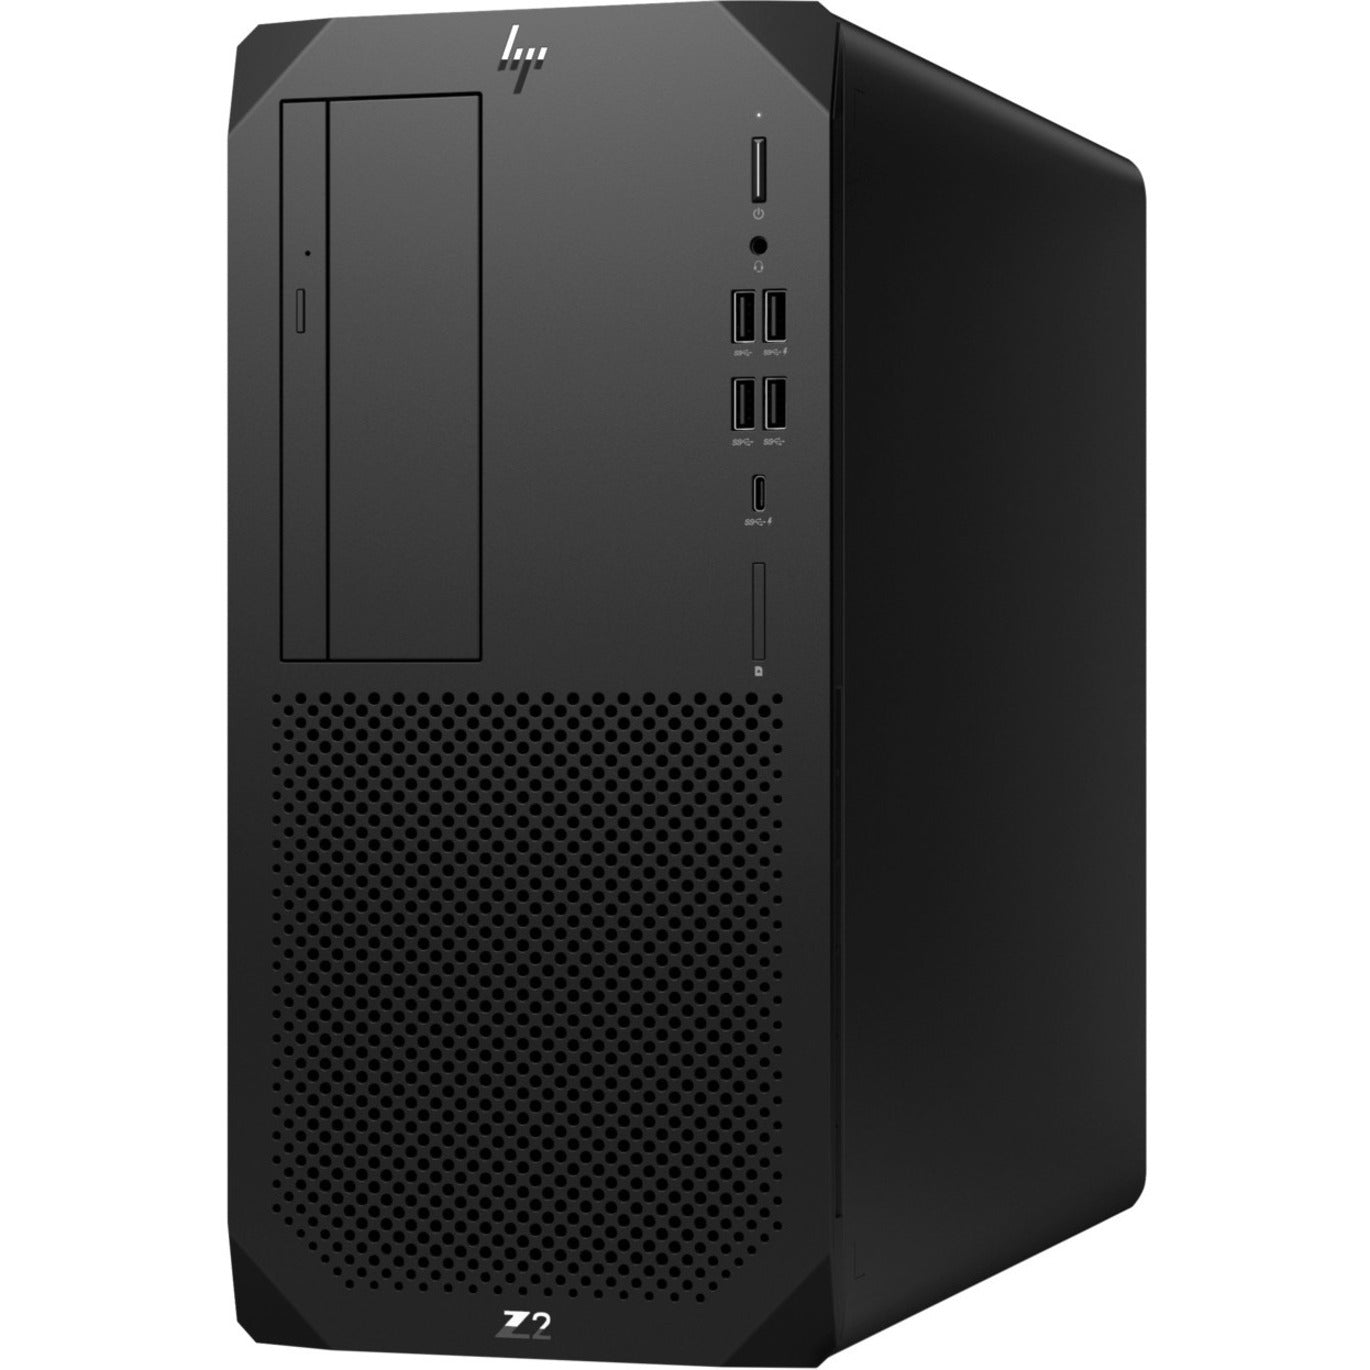 HP Z2 G9 Workstation - Intel Core i7 Dodeca-core - 16GB RAM - 512GB SSD - Tower [Discontinued]